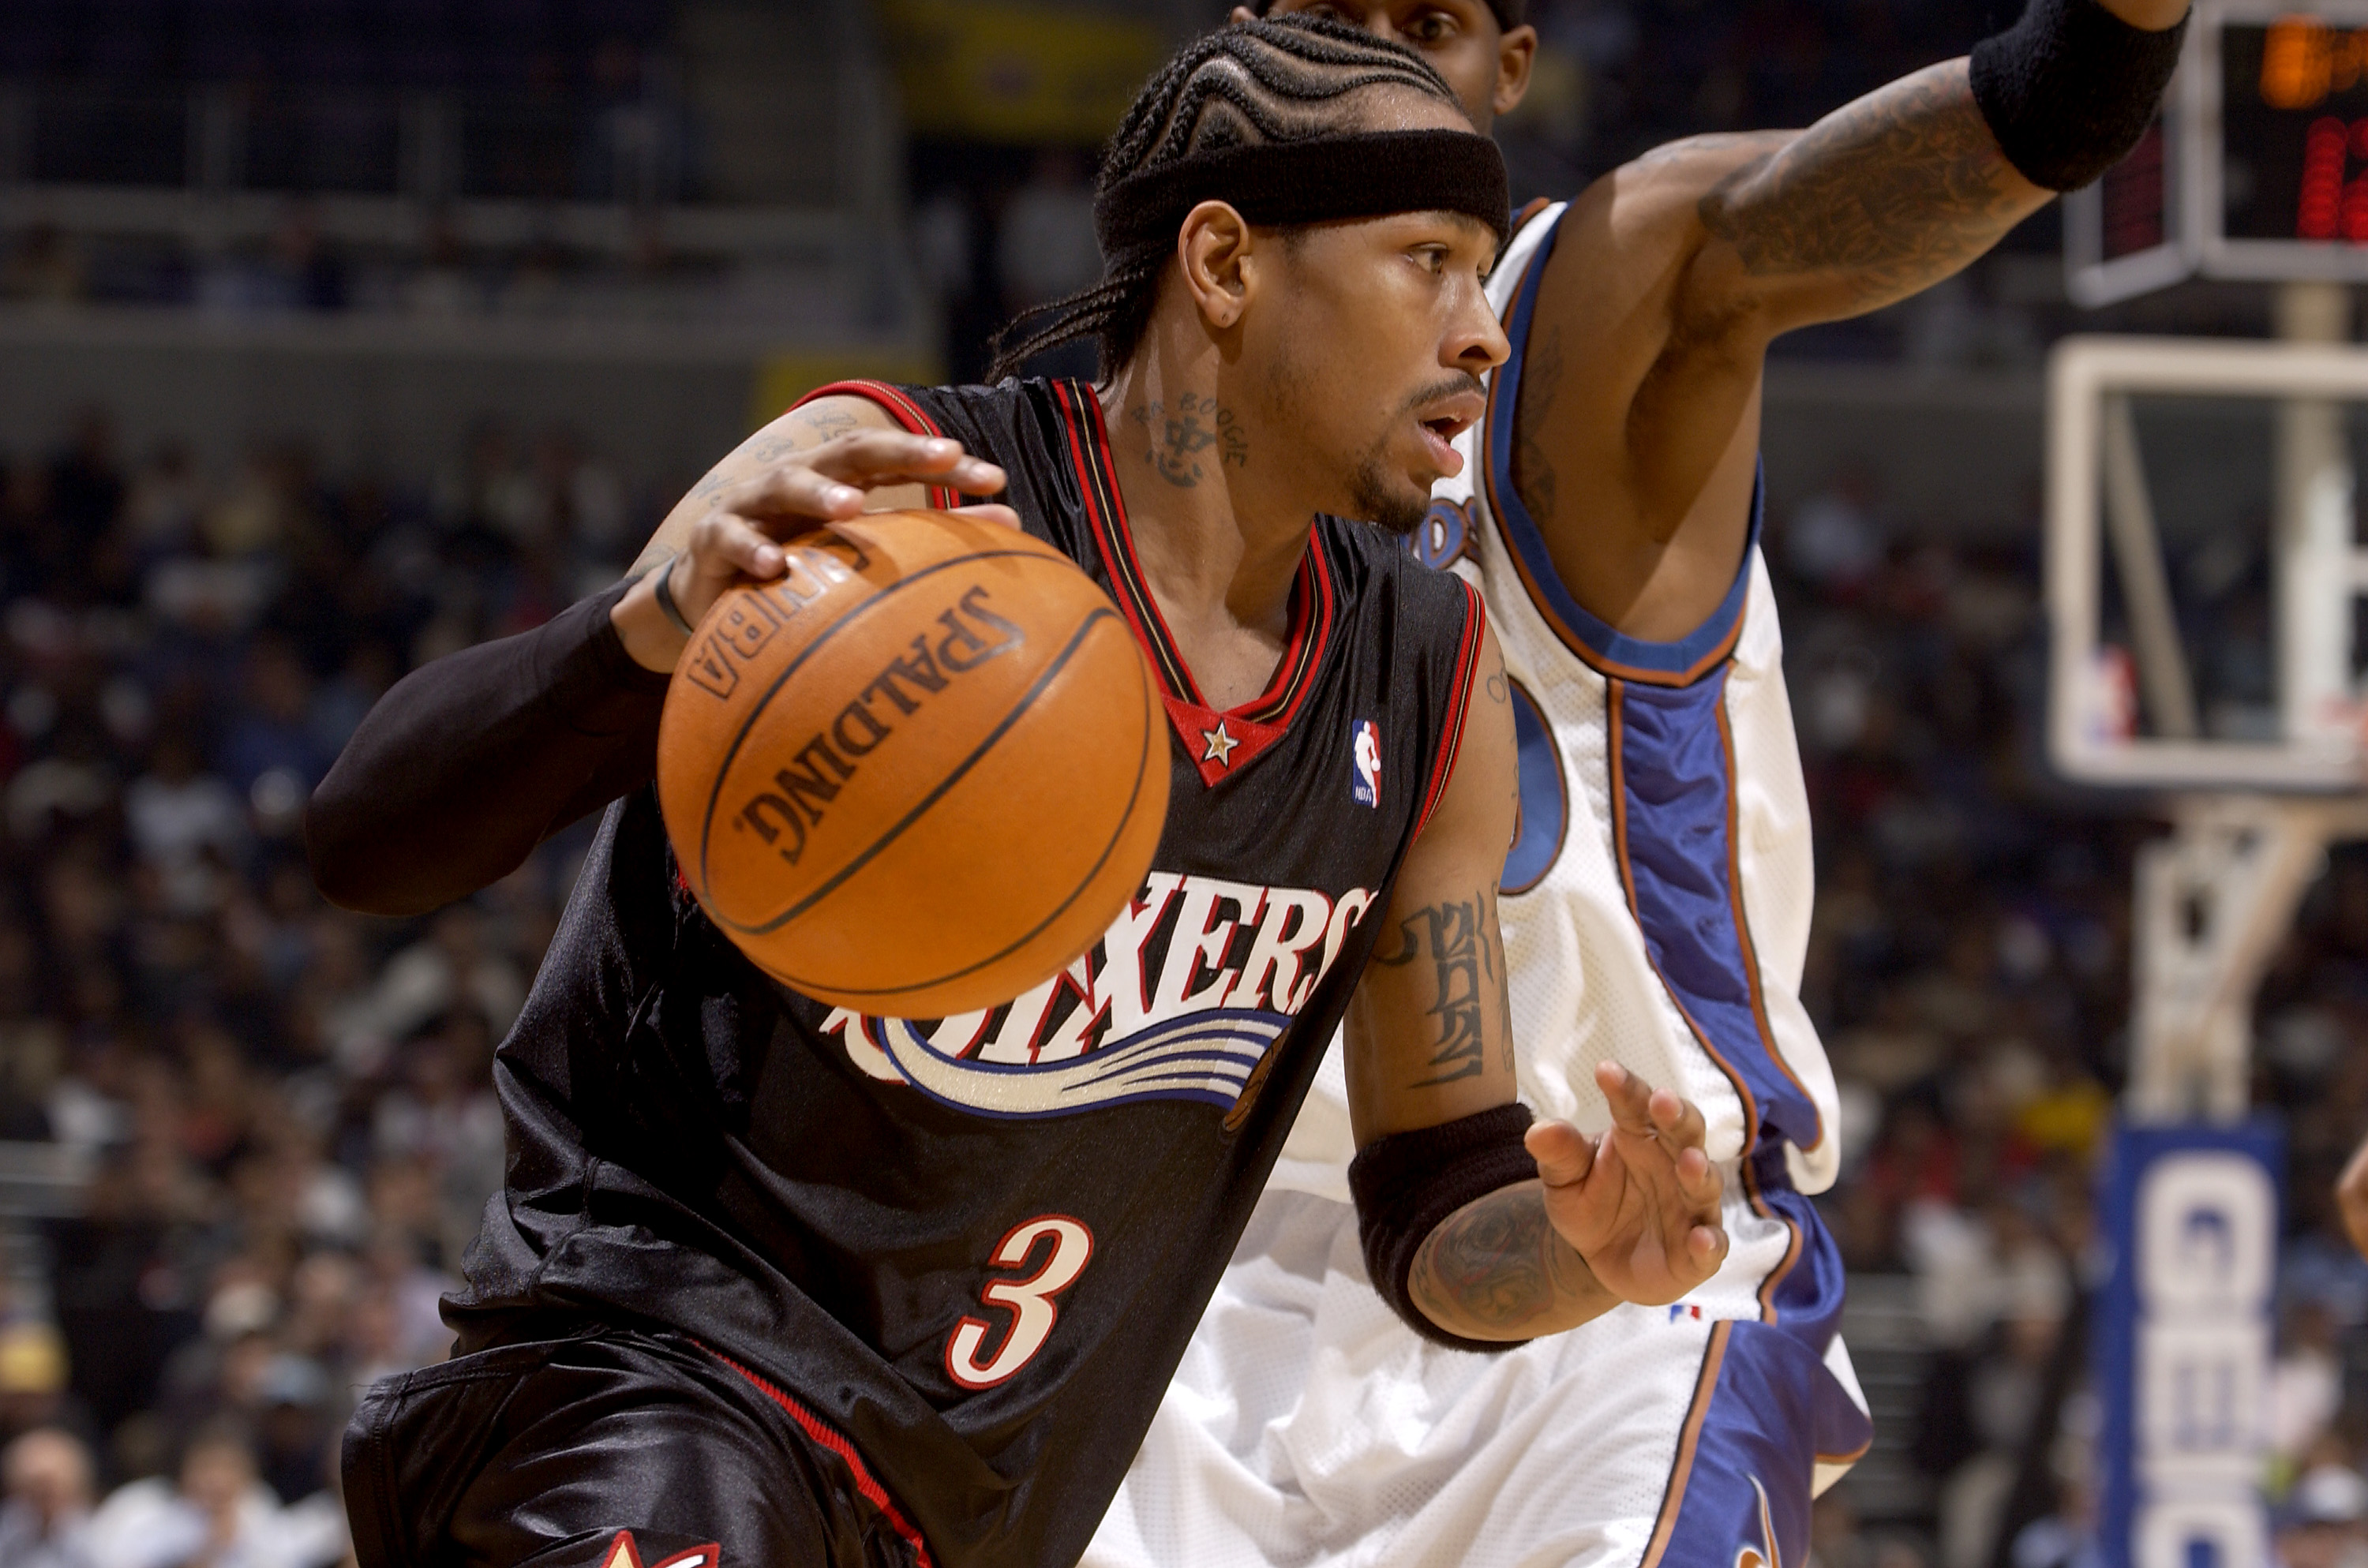 Don't do that again because he's gonna pay my fine” — Allen Iverson looks  back on his “big brother” Vernon Maxwell protecting him - Basketball  Network - Your daily dose of basketball